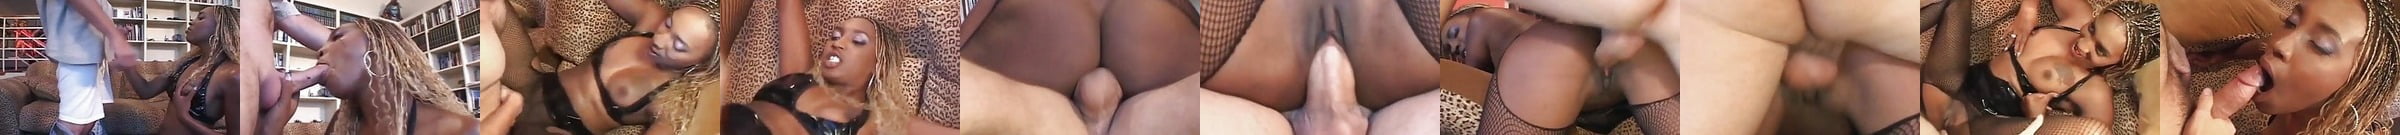 Threesome With Jada Fire Joey And Avy Scott Free Porn 16 Xhamster 